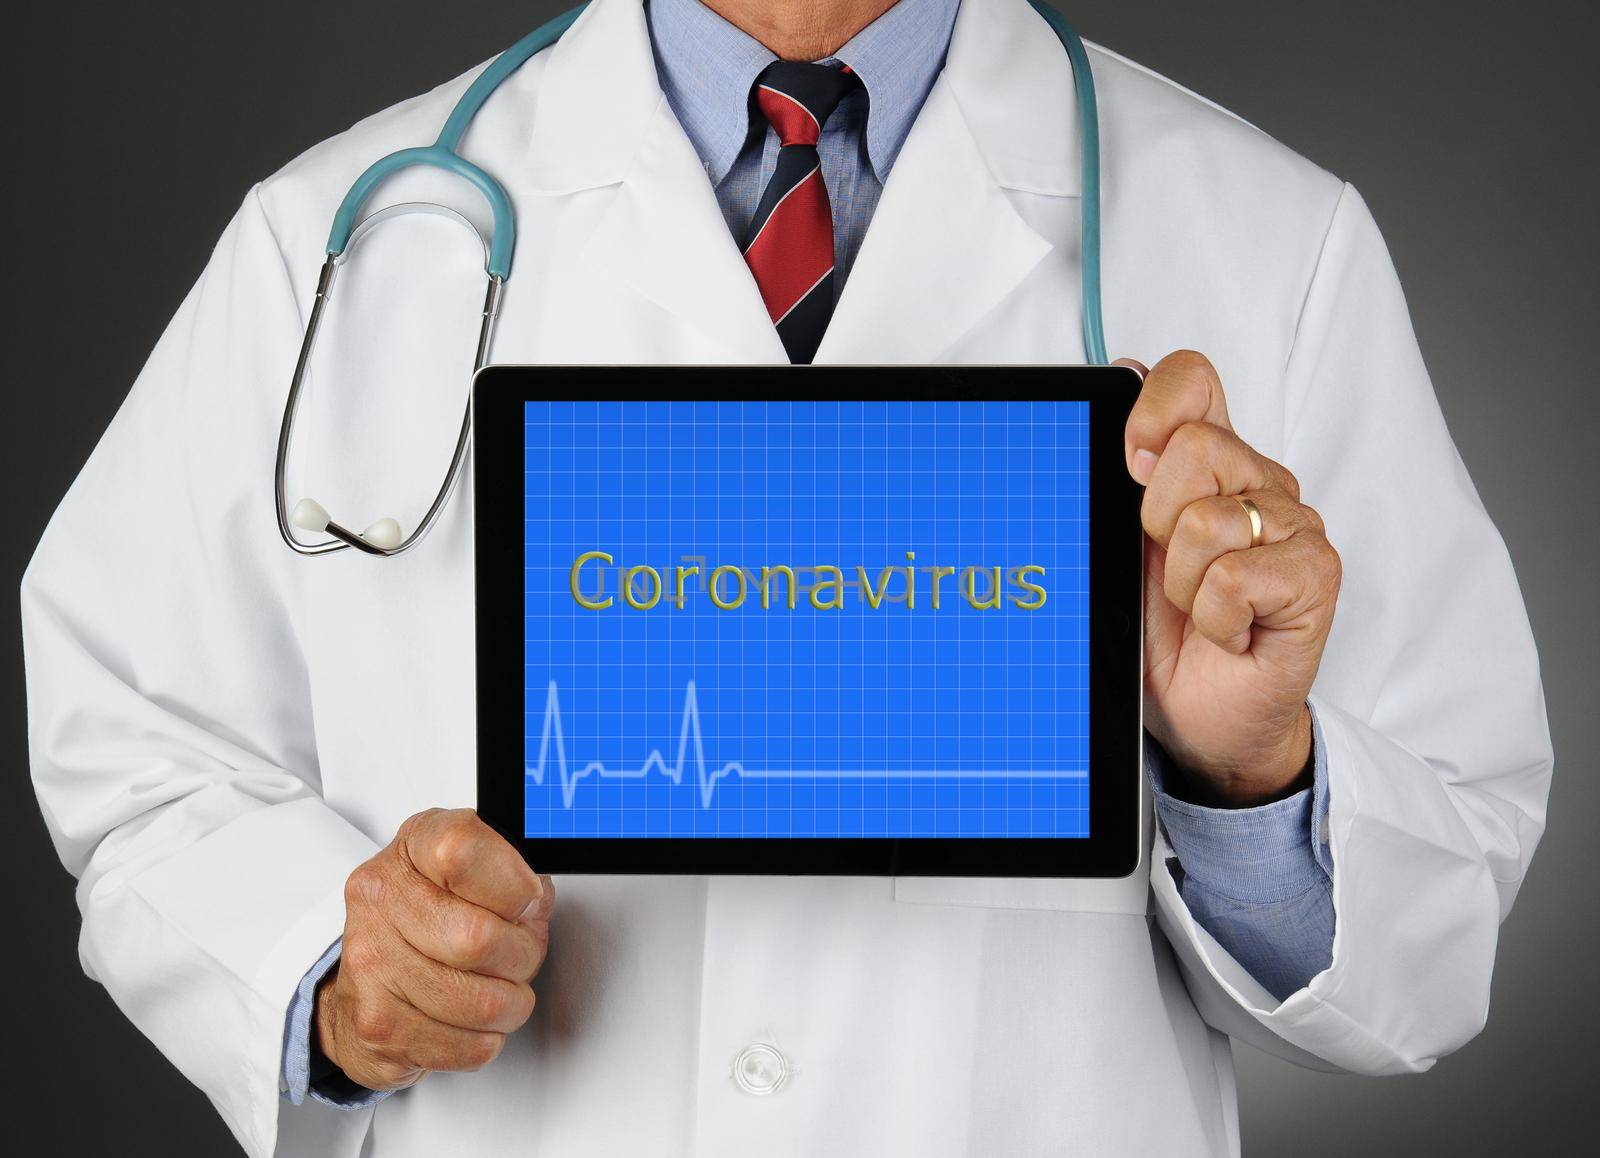 Closeup of a doctor holding a tablet computer with Coronavirus written on the screen.  Horizontal format over a light to dark gray background. Man is unrecognizable.